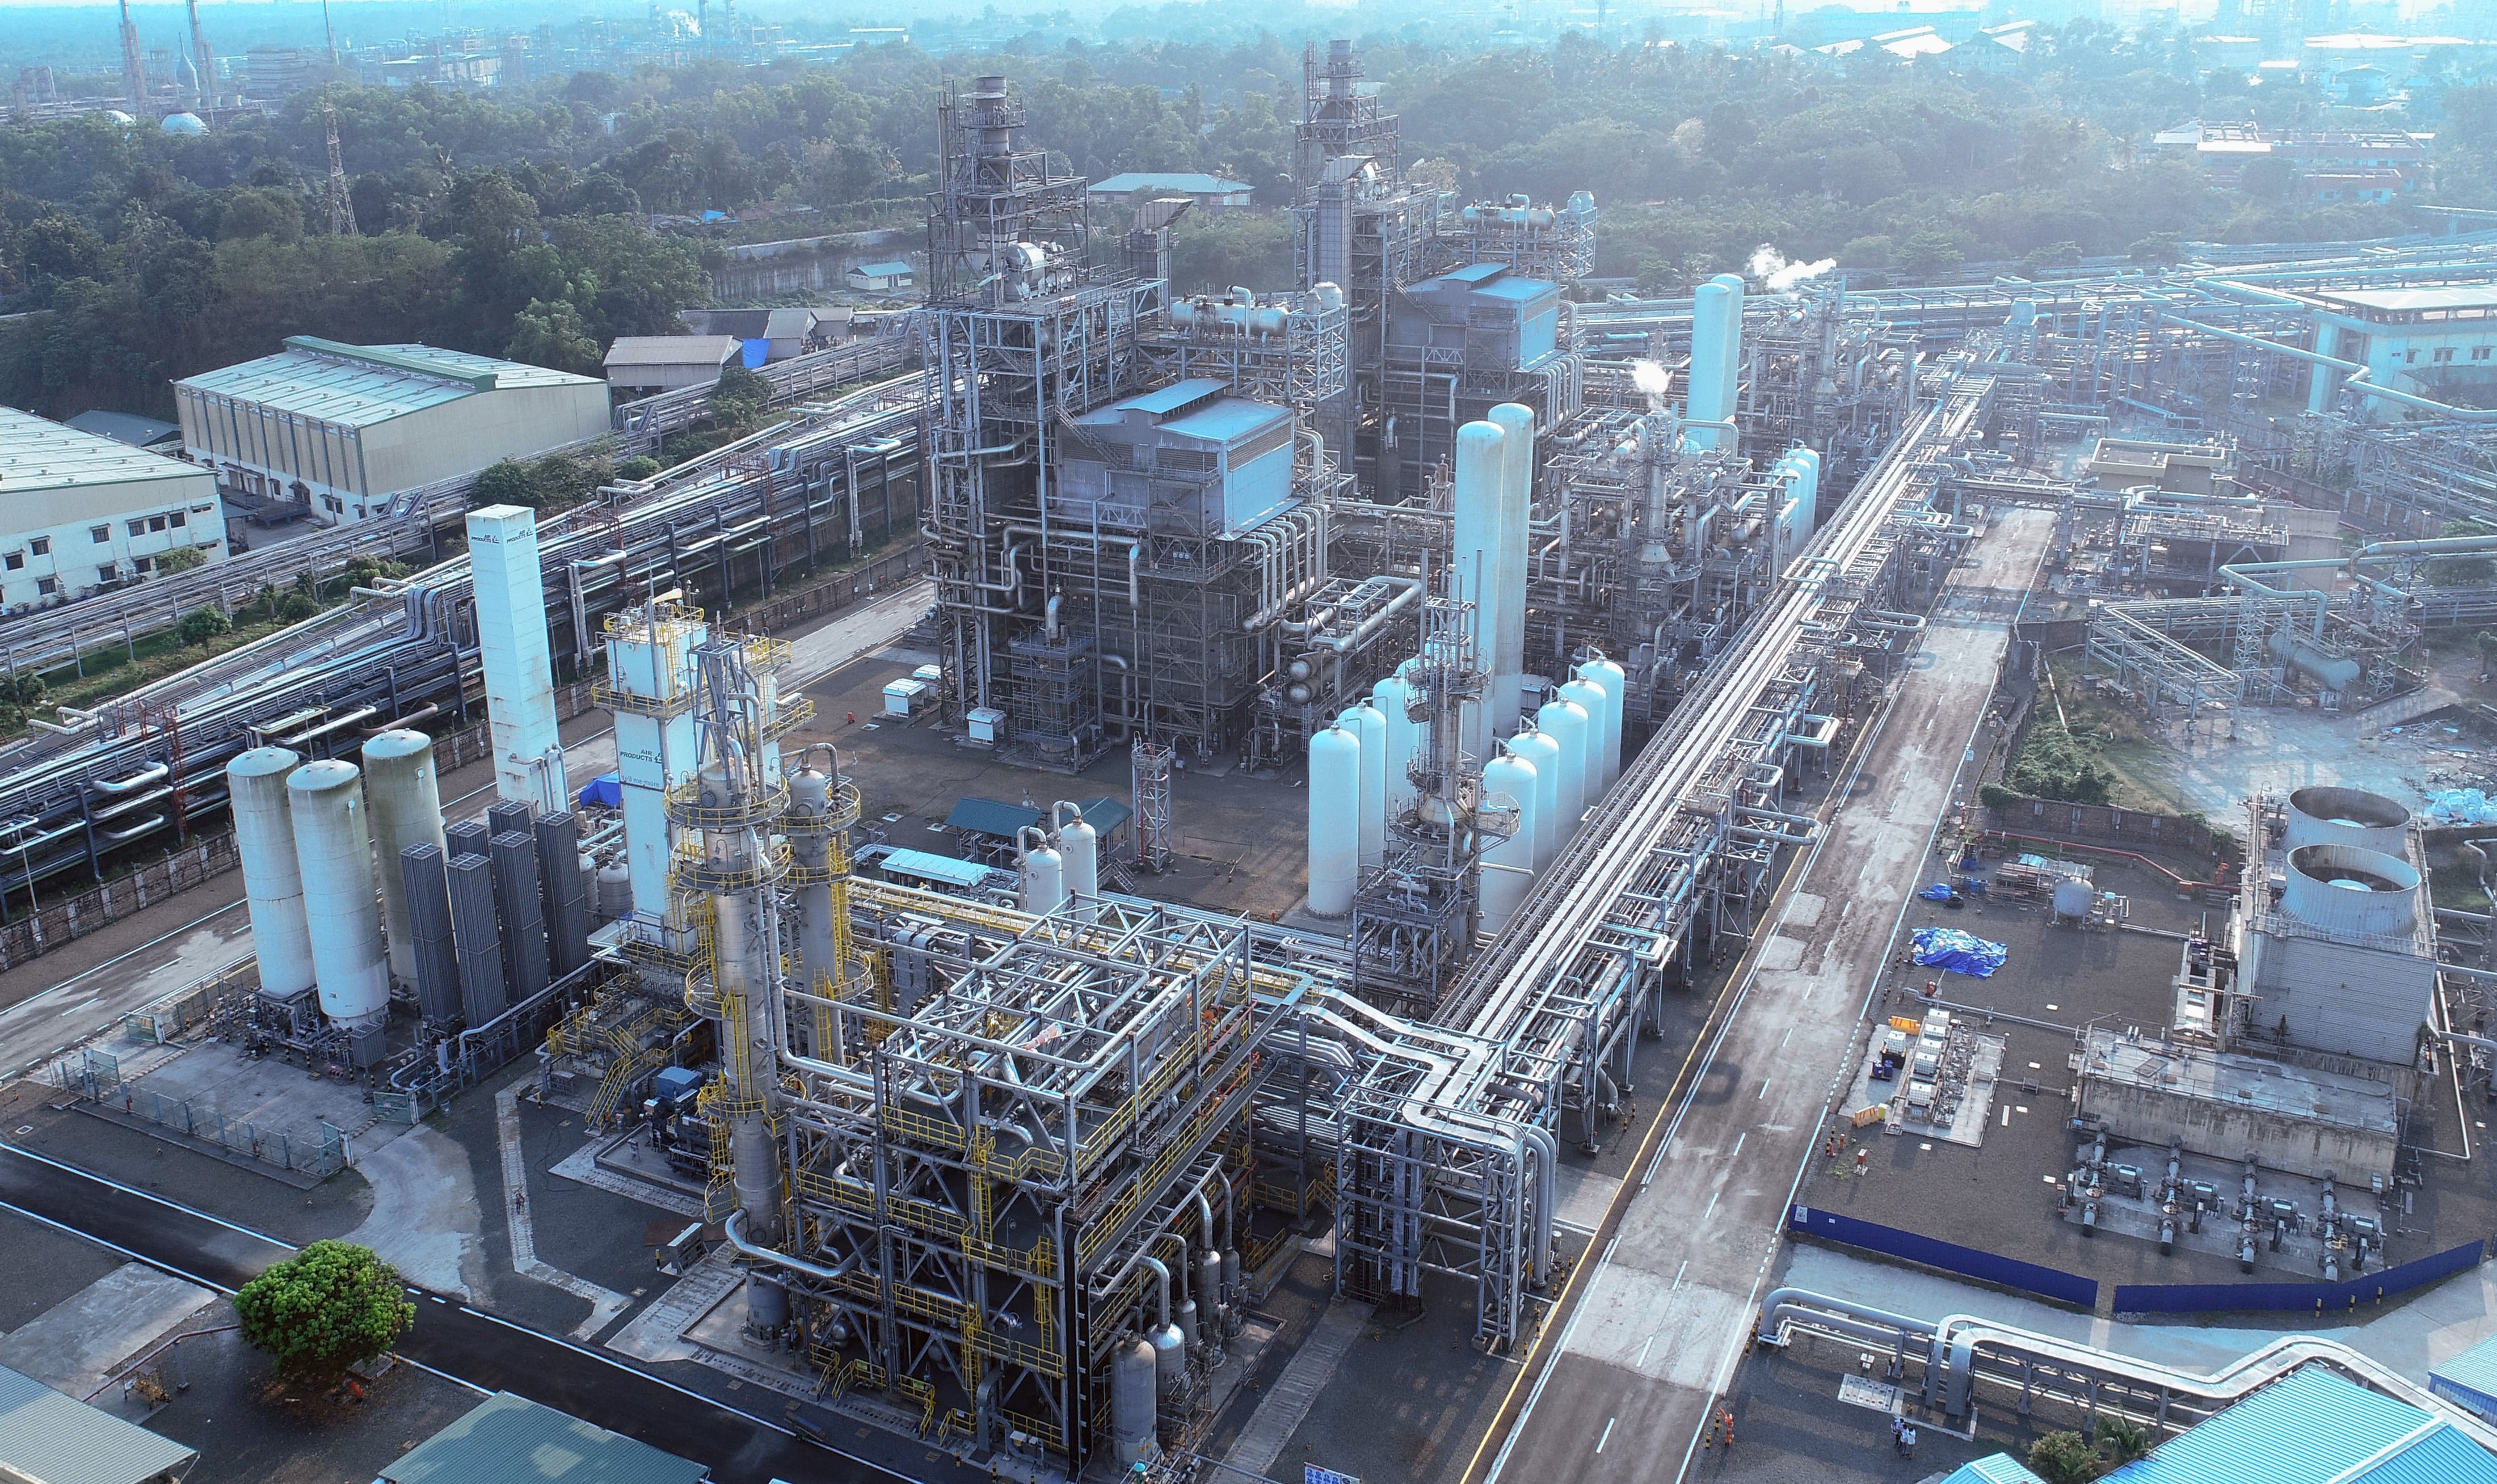 Air Products’ Kochi Industrial Gas Complex Reliably Supplying Syngas to Bharat Petroleum in India